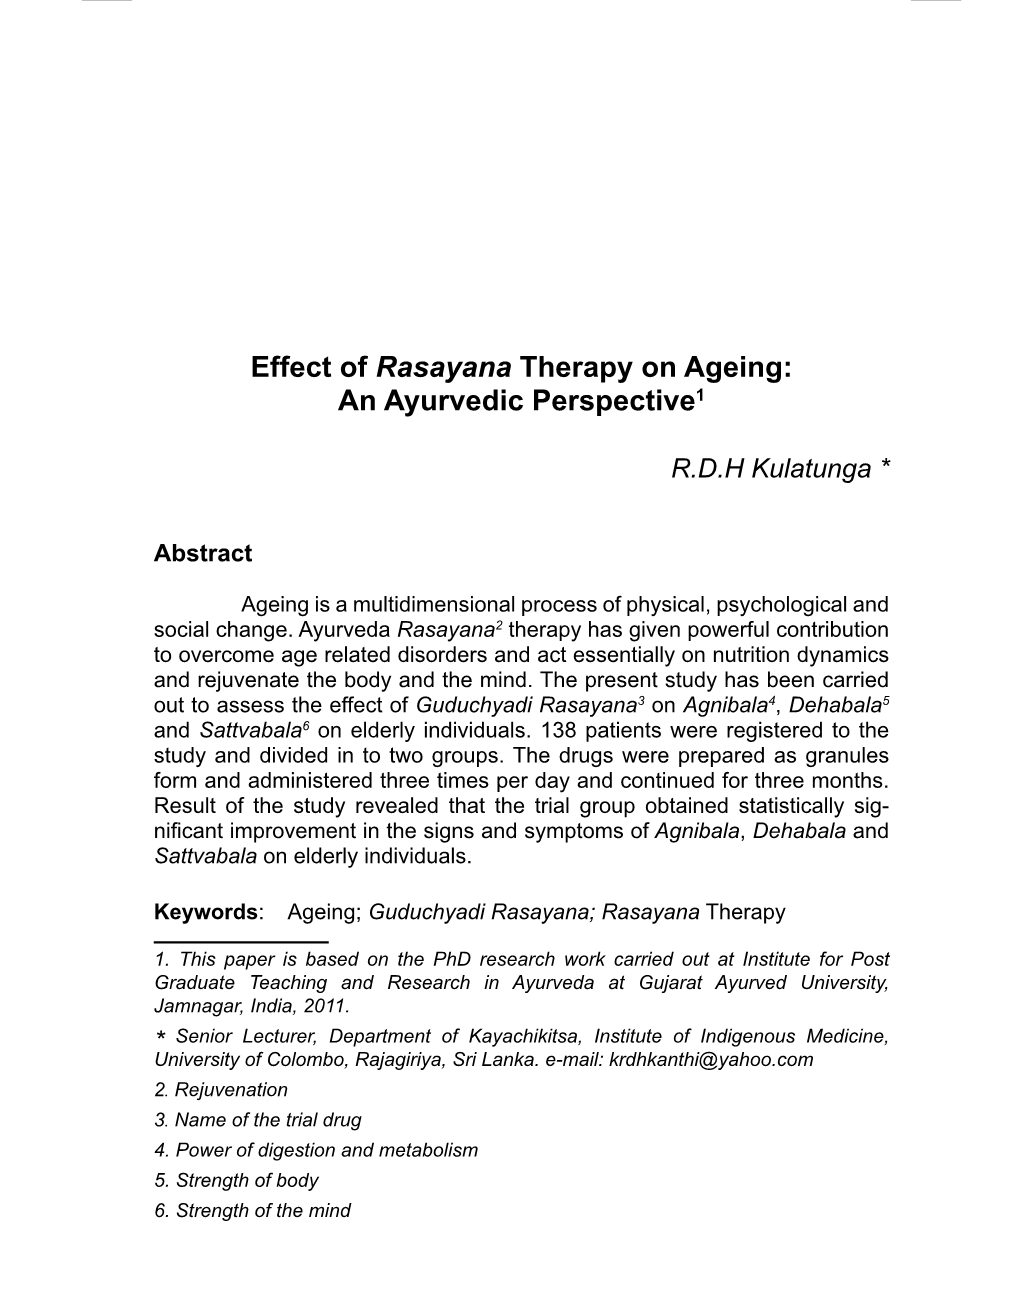 Effect of Rasayana Therapy on Ageing: an Ayurvedic Perspective1